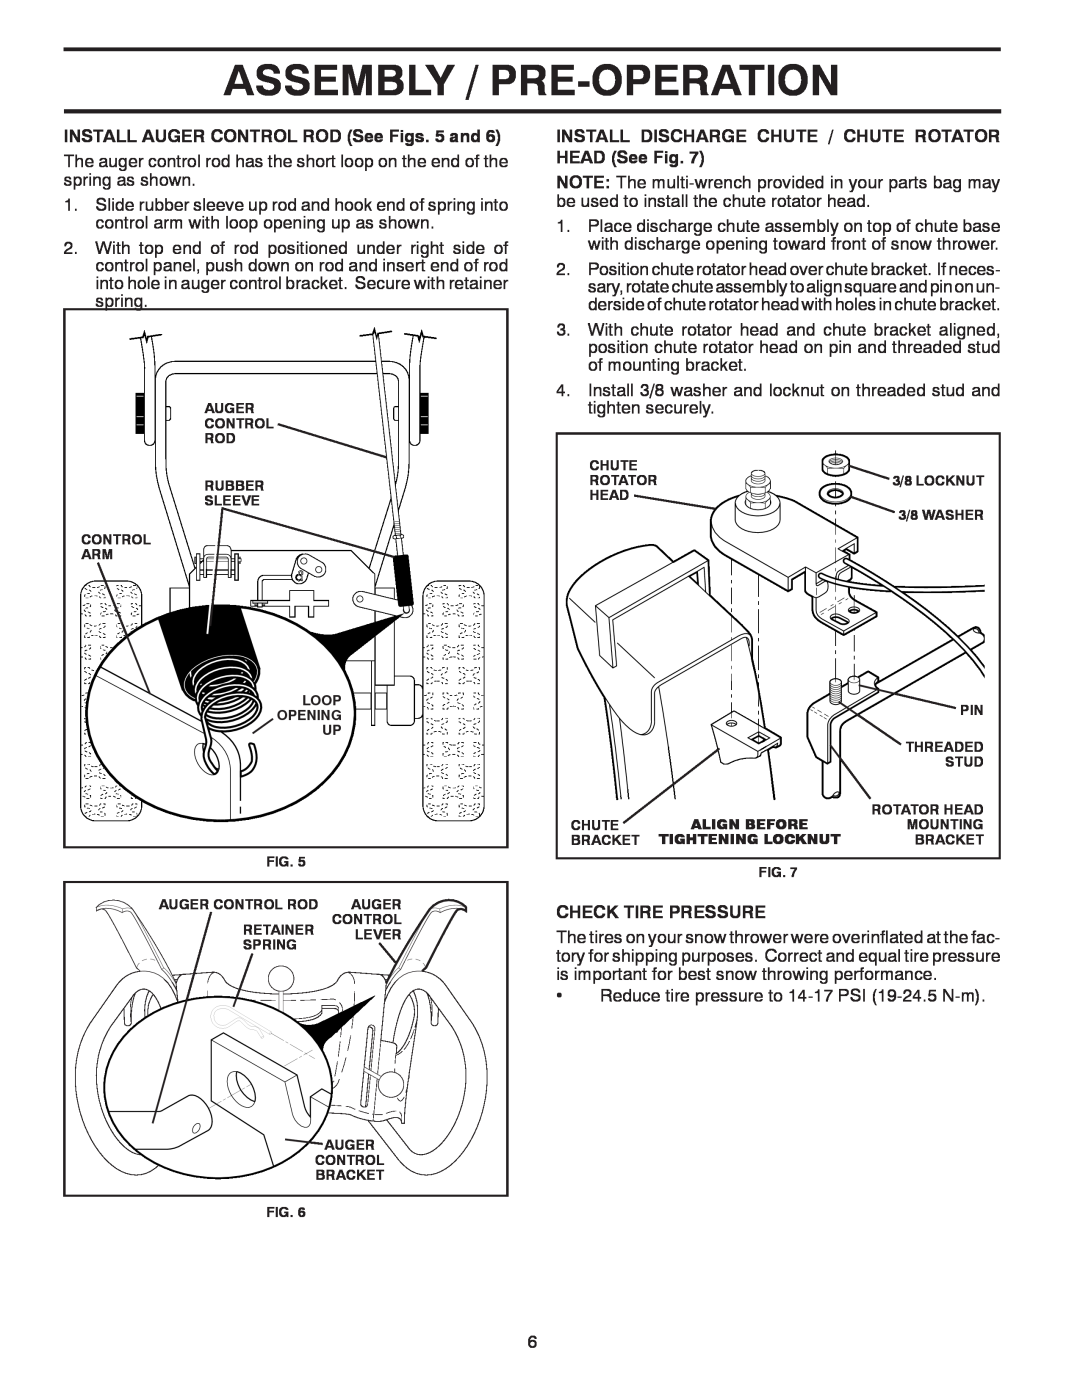 Poulan 414659 owner manual Assembly / Pre-Operation, INSTALL AUGER CONTROL ROD See Figs. 5 and, Check Tire Pressure 